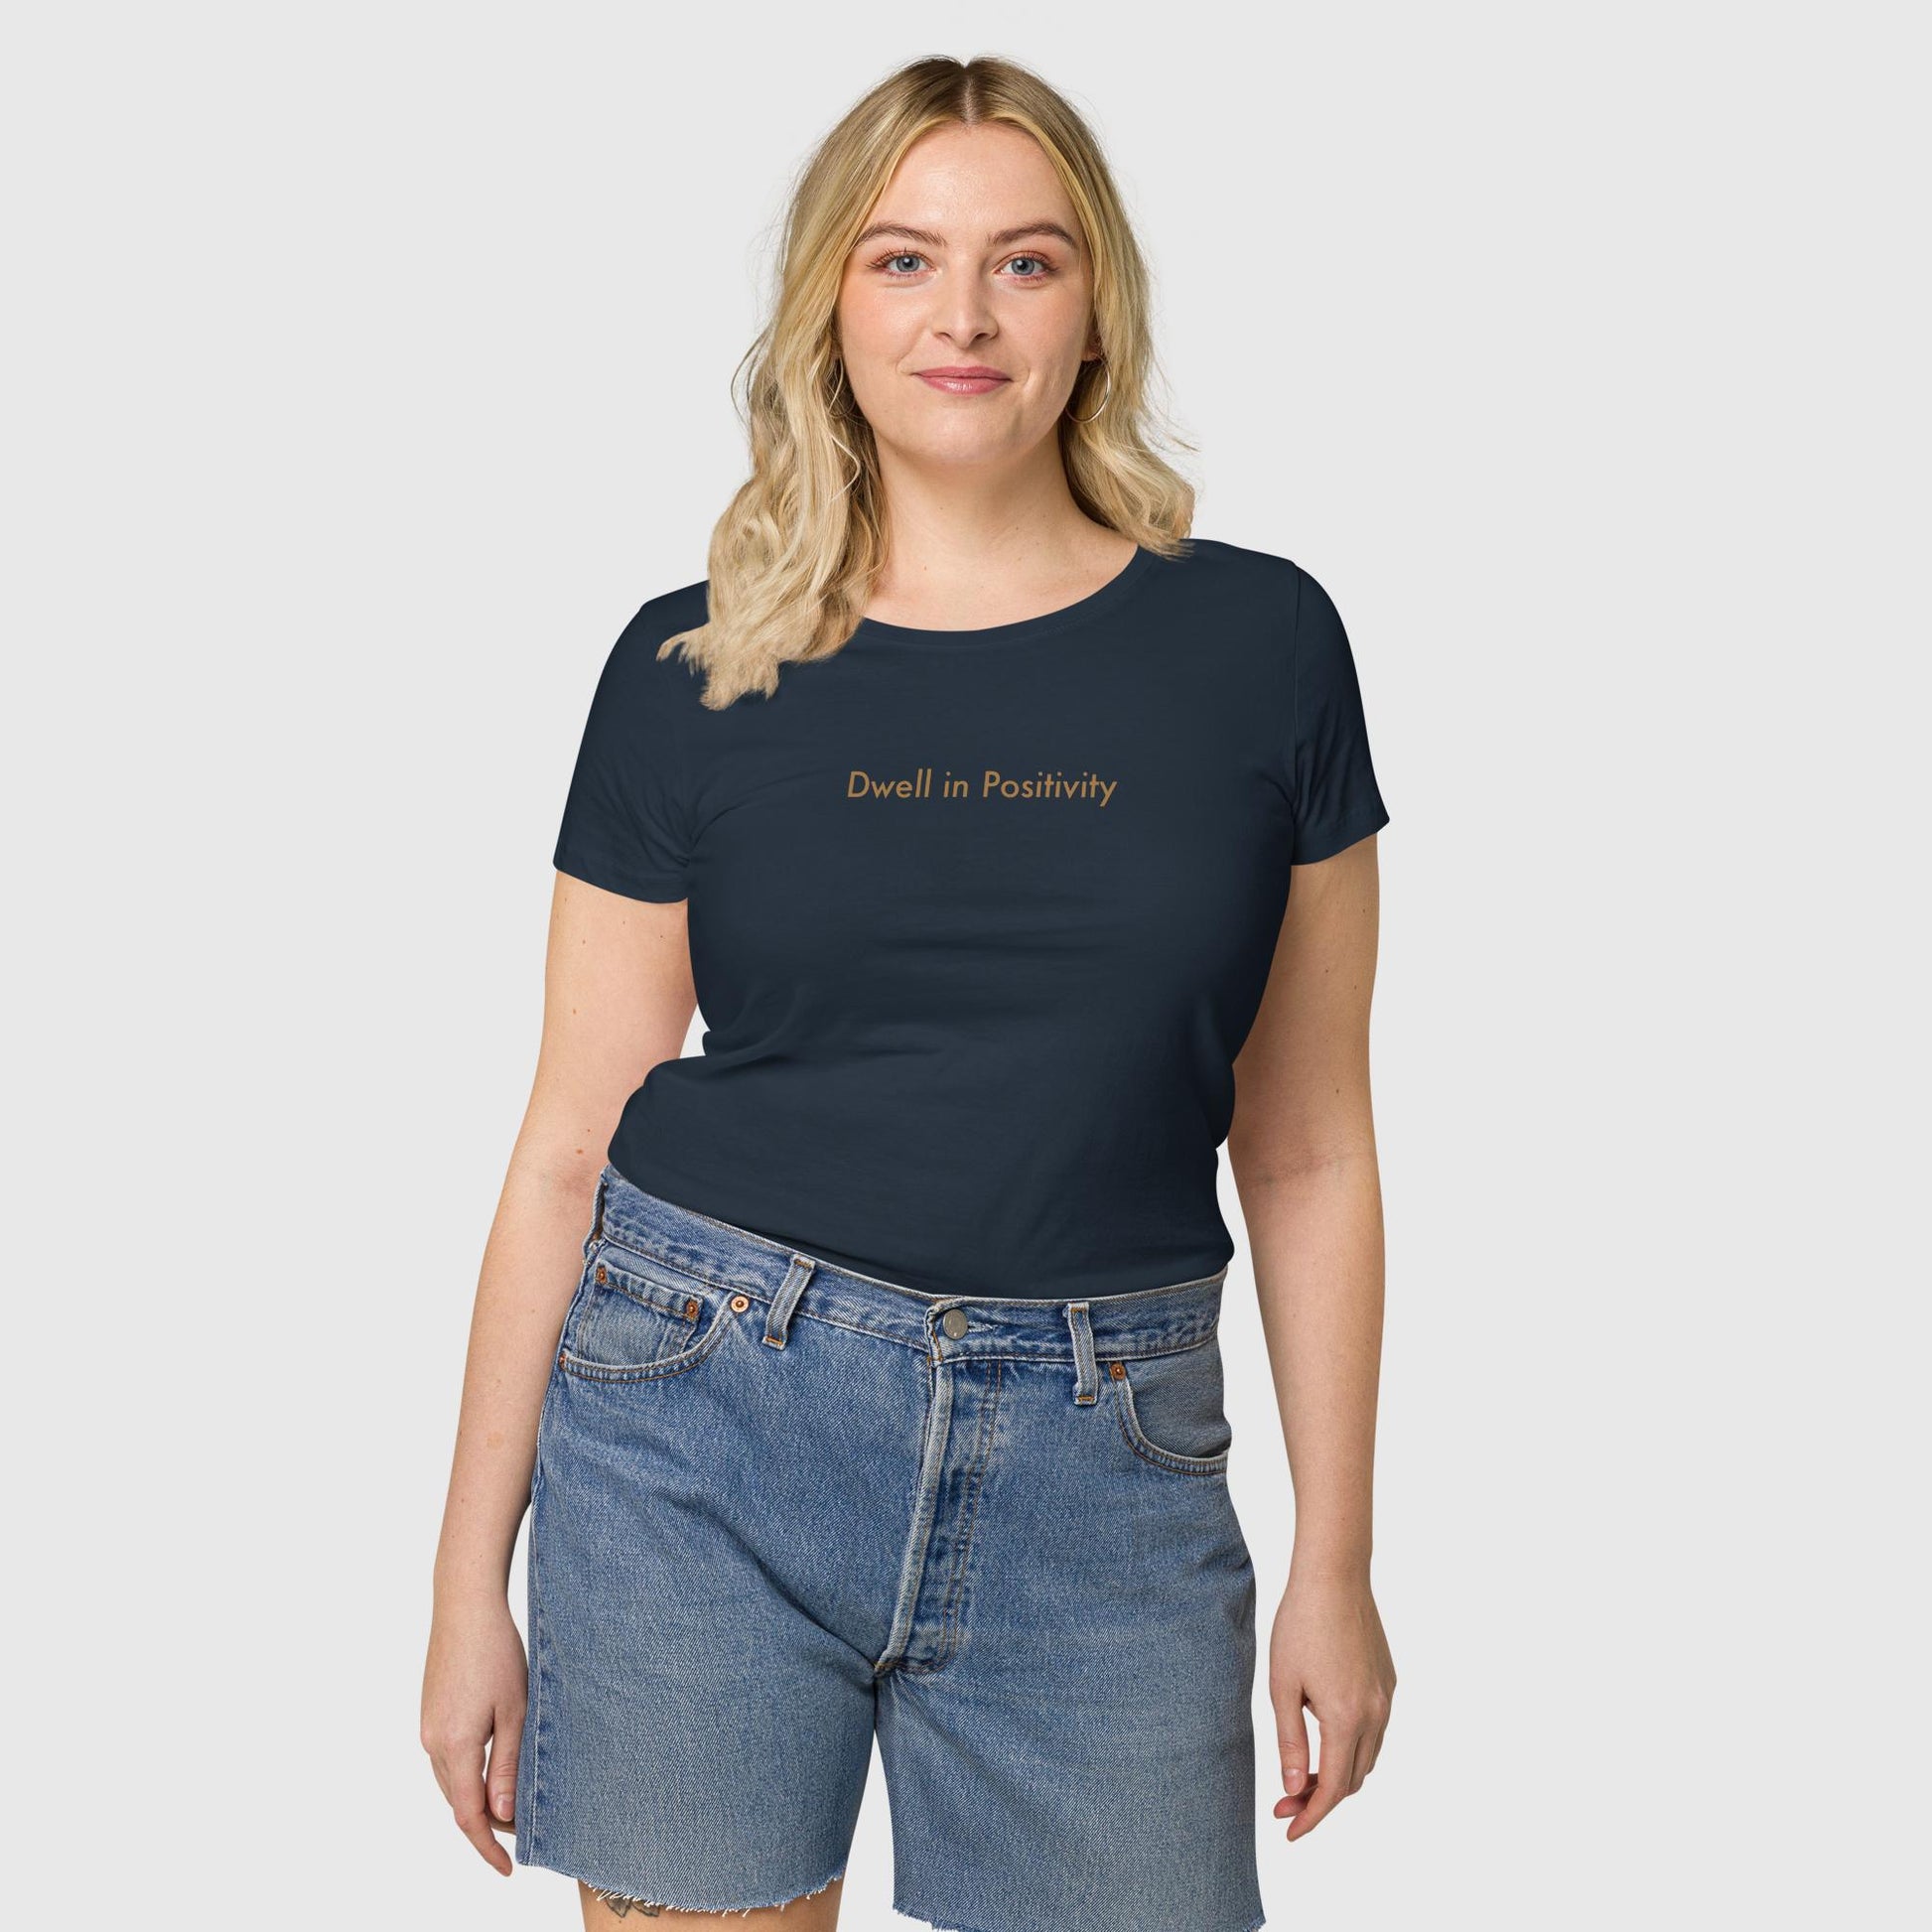 Women's french navy organic cotton t-shirt that features Emily Dickinson's quote, "I dwell in positivity."